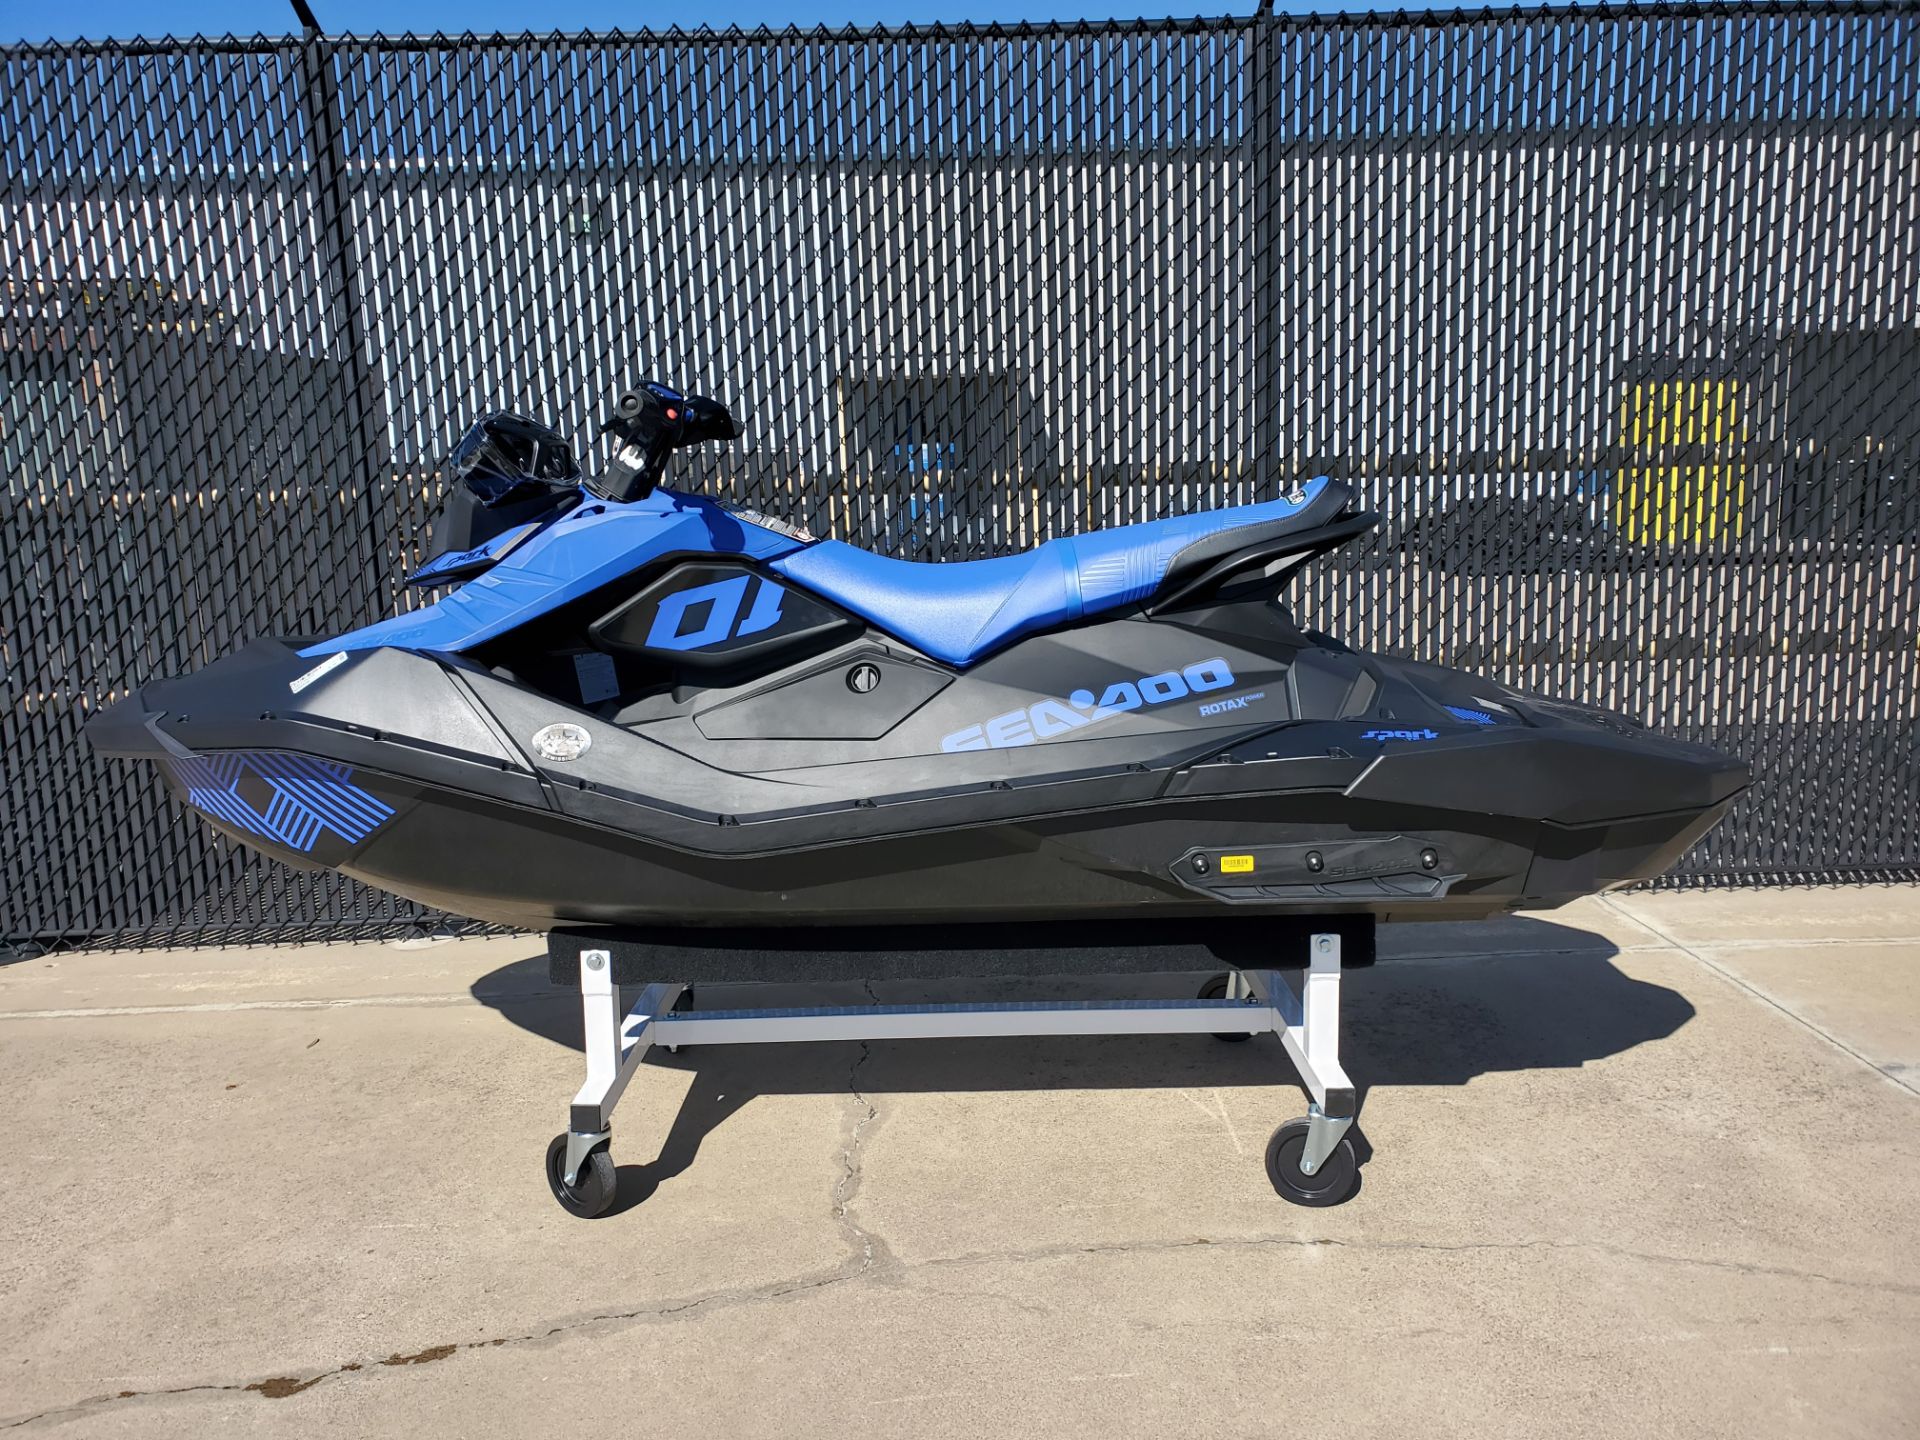 2023 Sea-Doo Spark Trixx 3up iBR + Sound System in Greenville, Texas - Photo 3